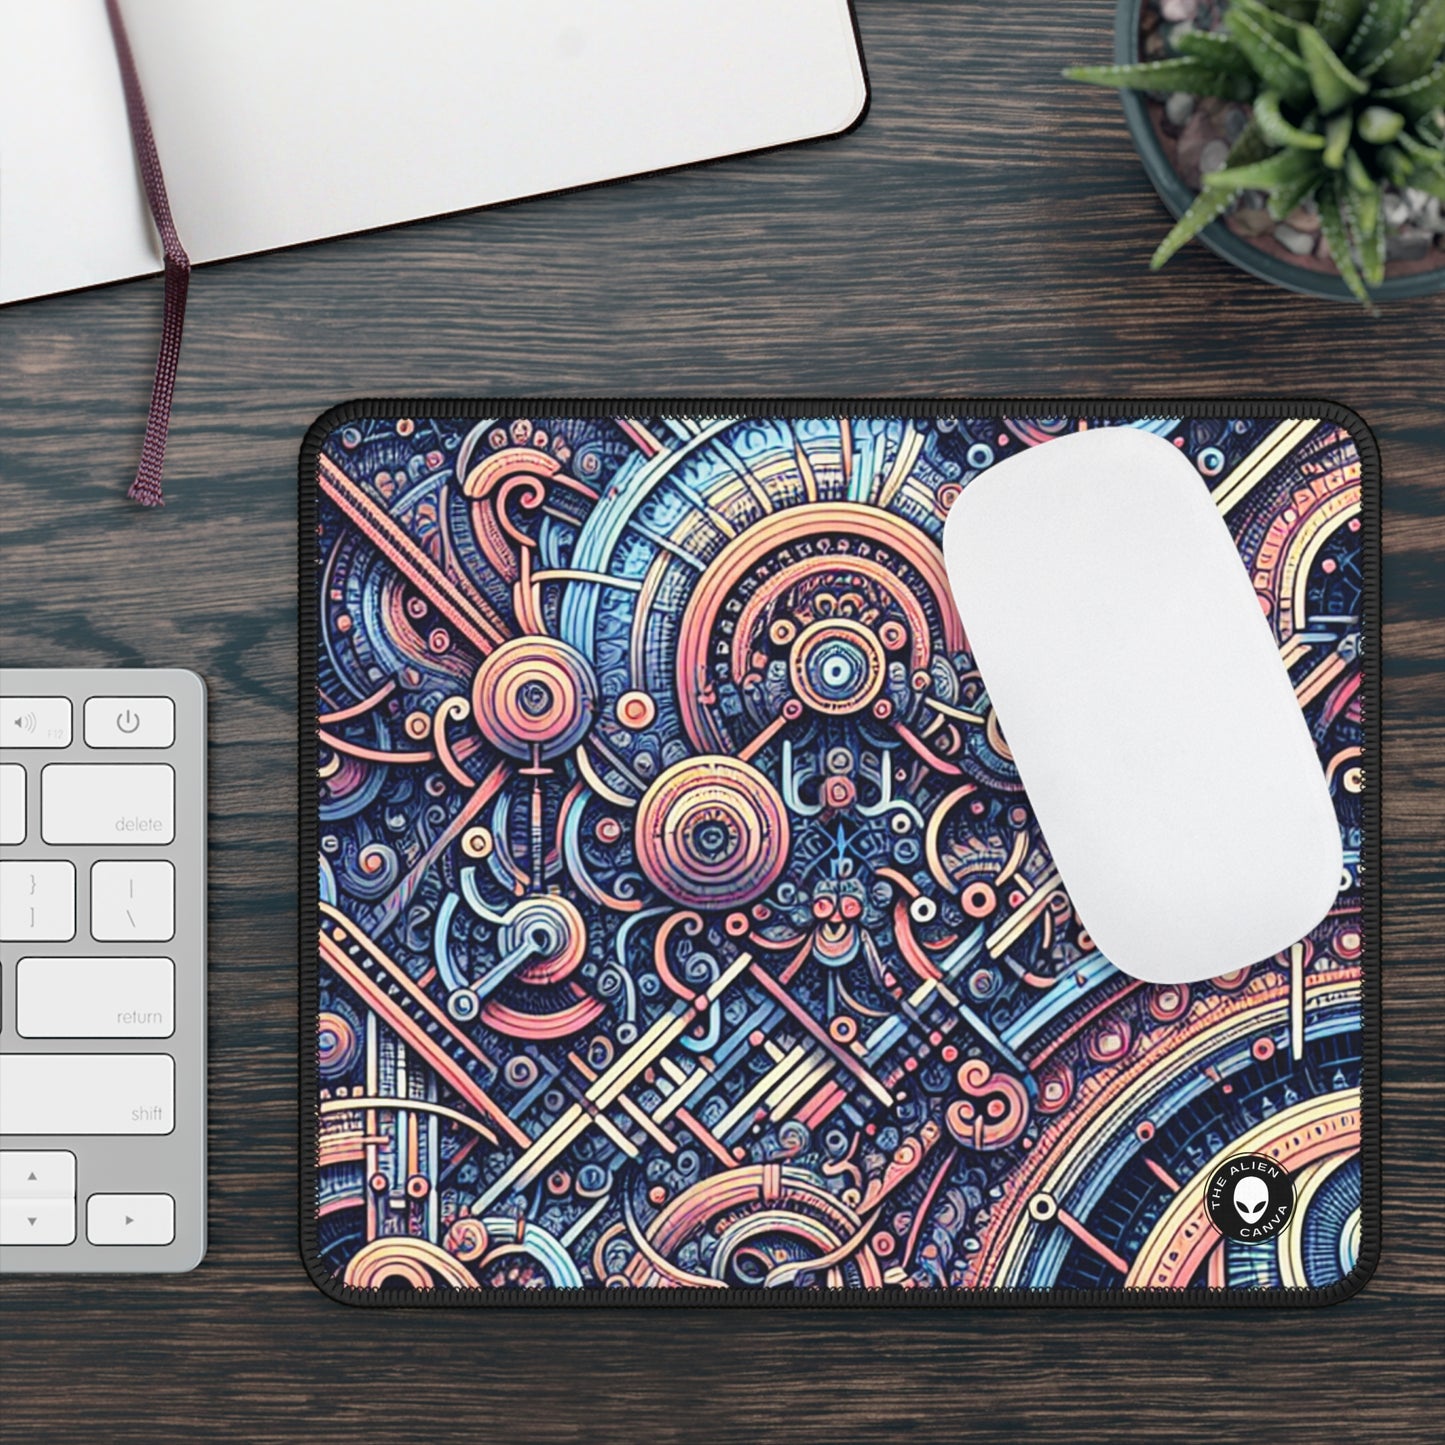 "Chaos & Order: A Dynamic Dance of Colors and Patterns" - The Alien Gaming Mouse Pad Algorithmic Art